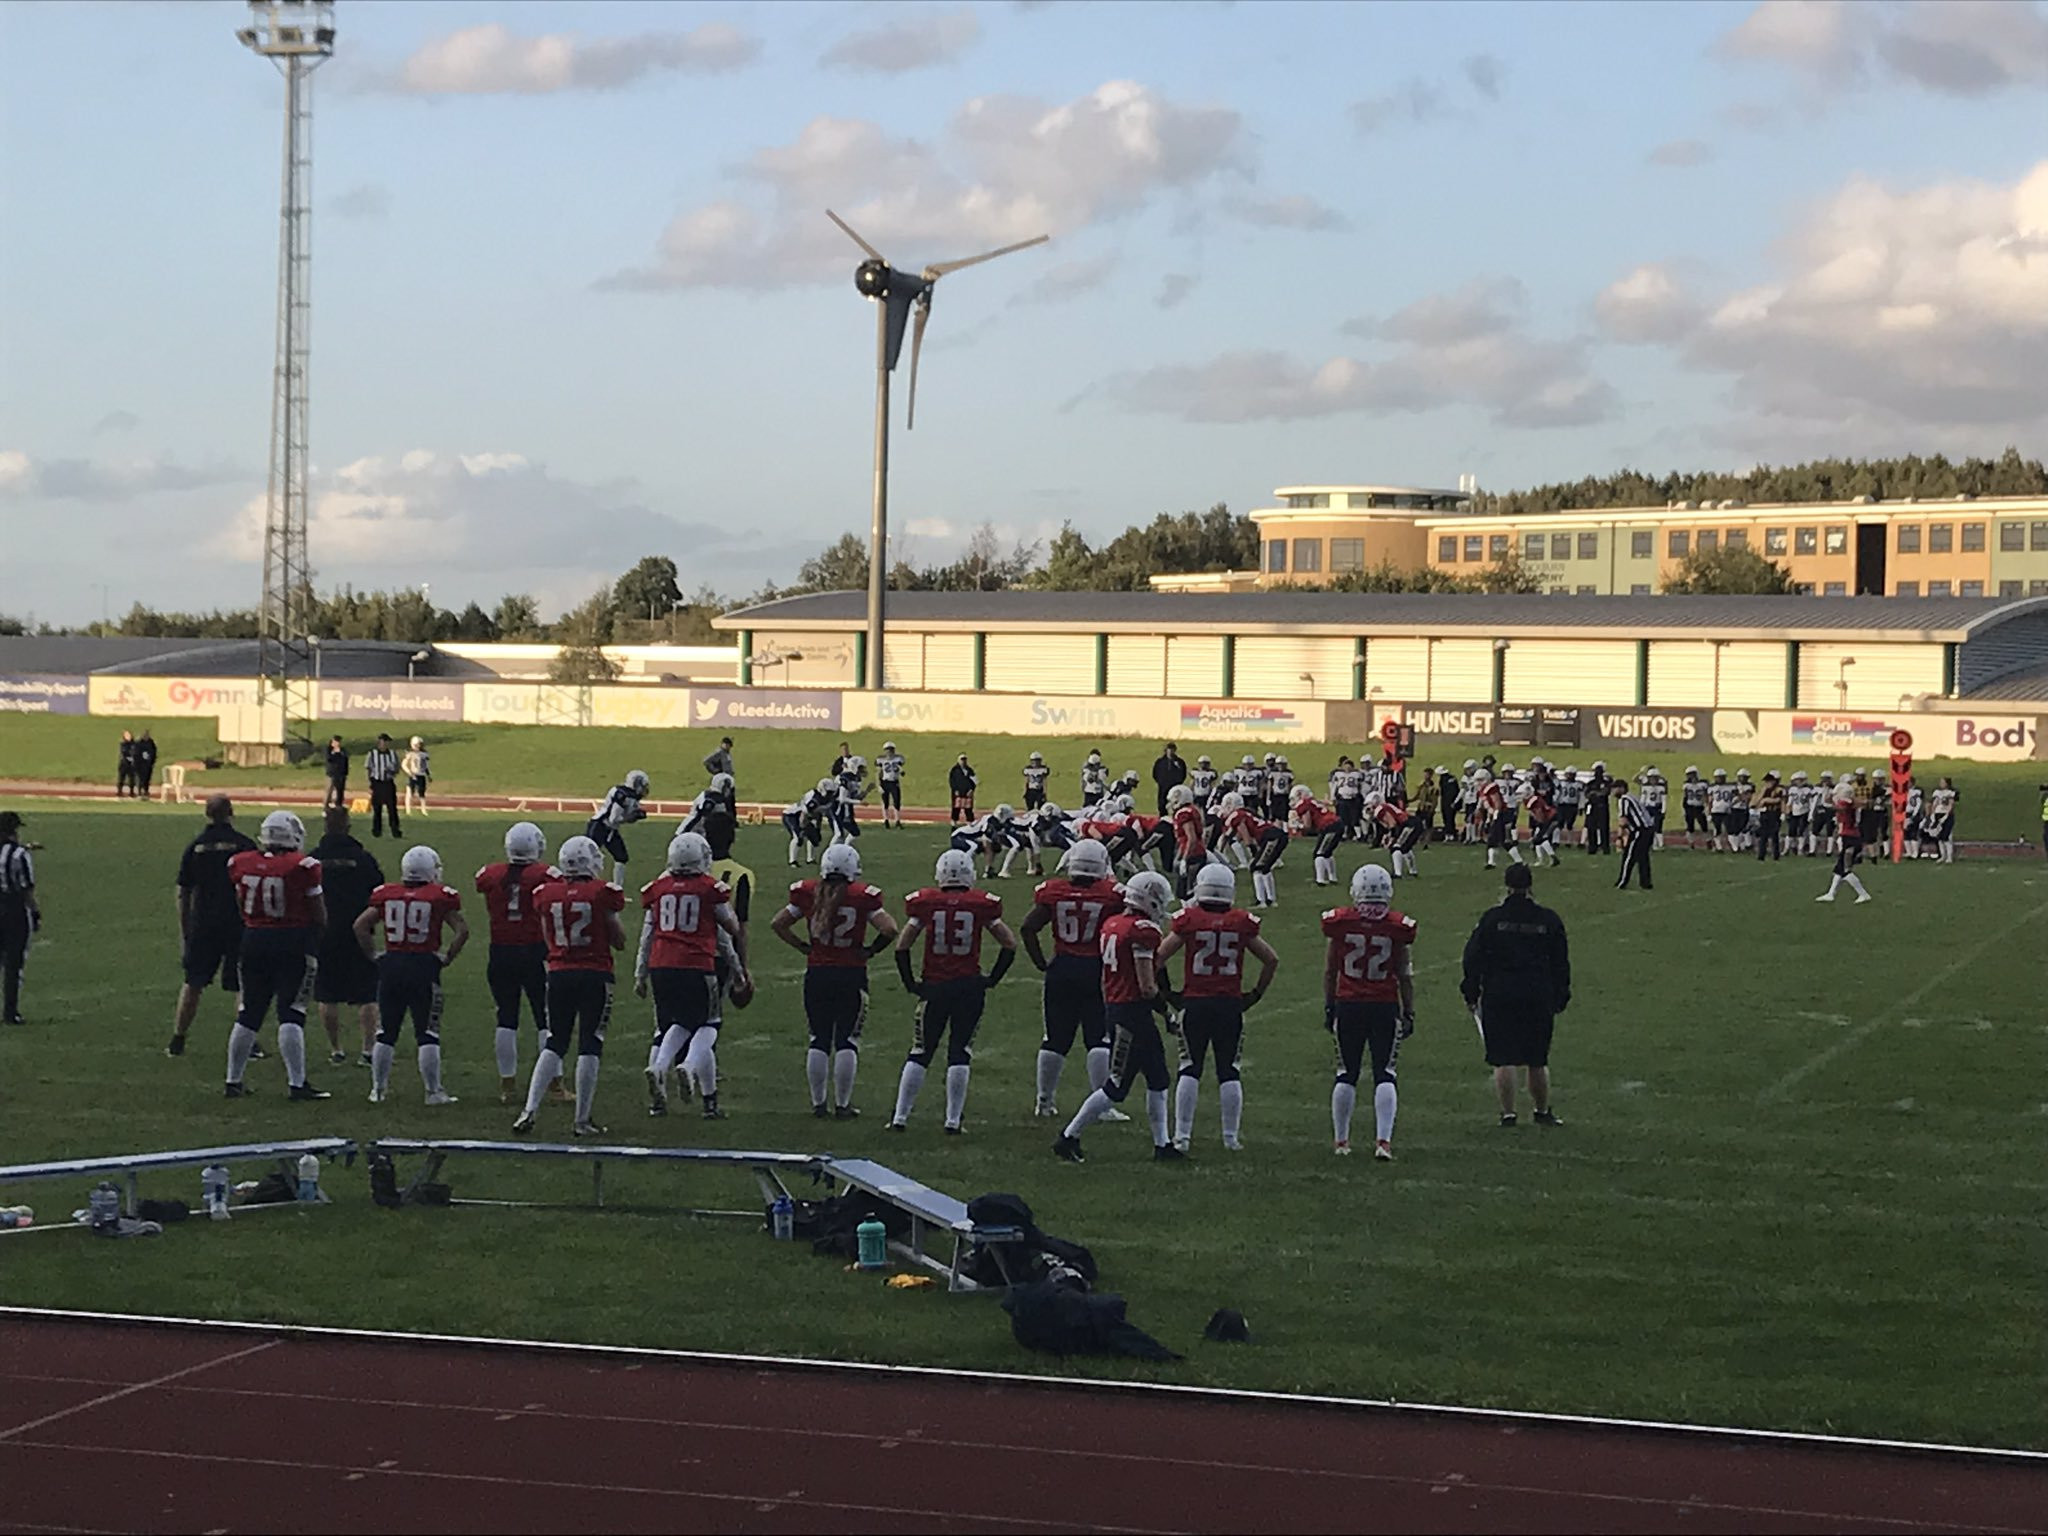 Finland retained the IFAF Women's European Championship despite losing 18-14 to hosts Britain ©Twitter/IFAF